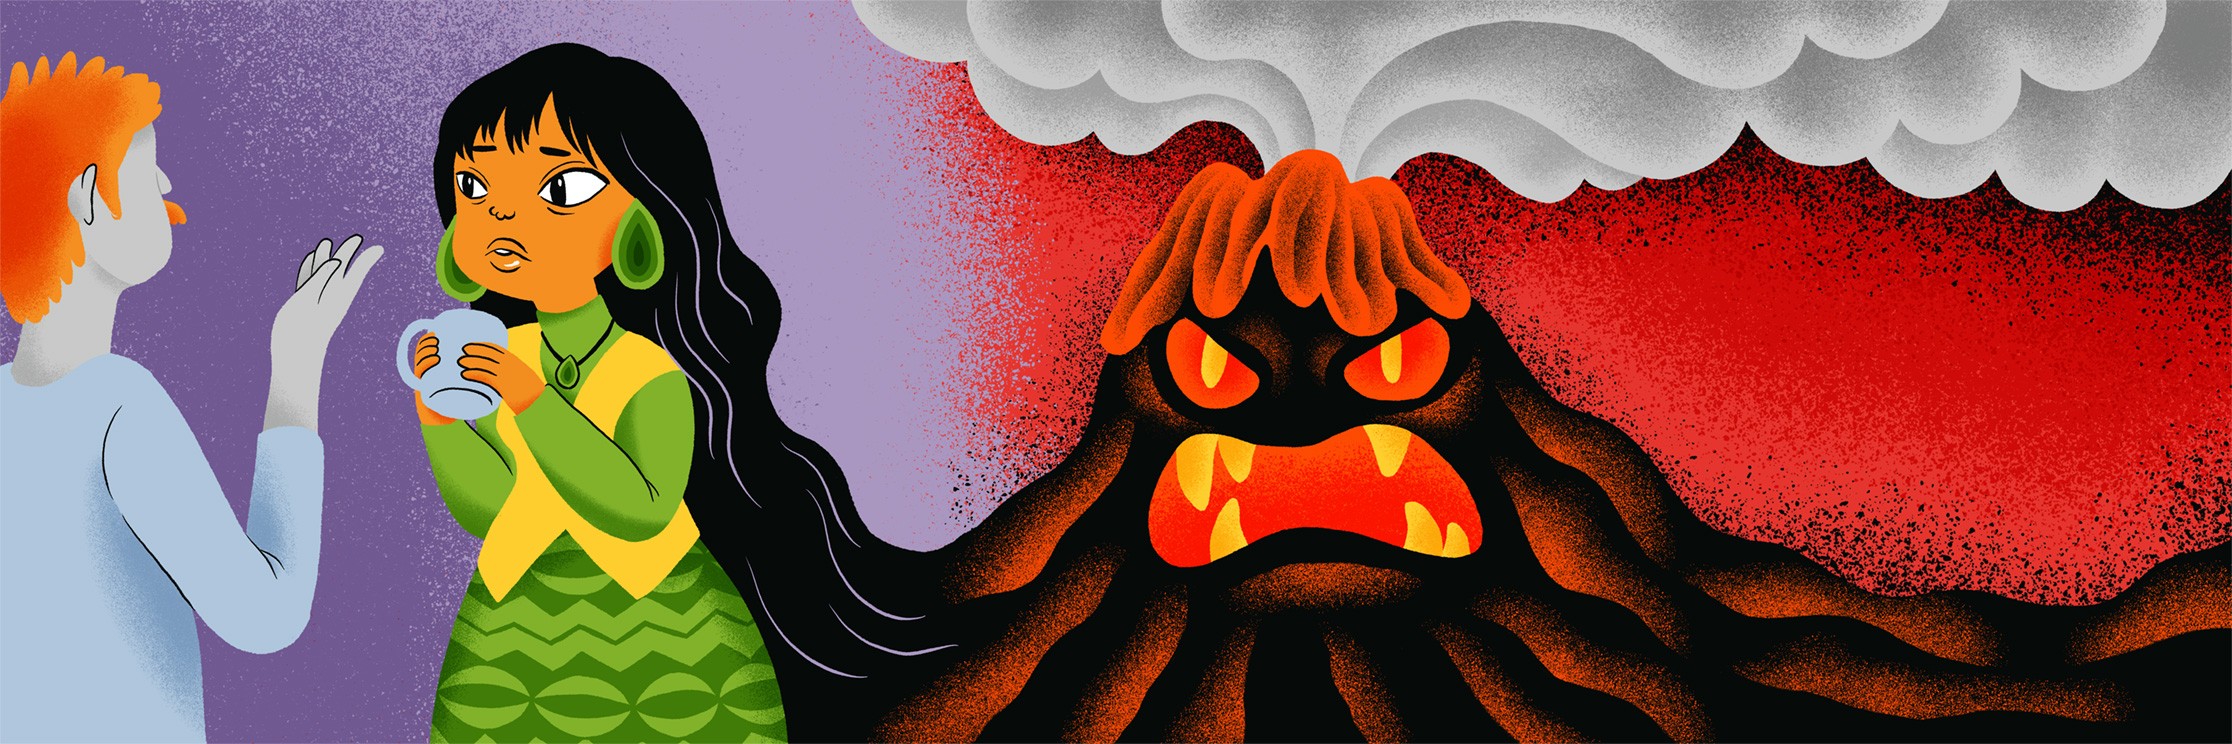 A landscape illustration of a person talking to a woman whose hair merges into a volcano.